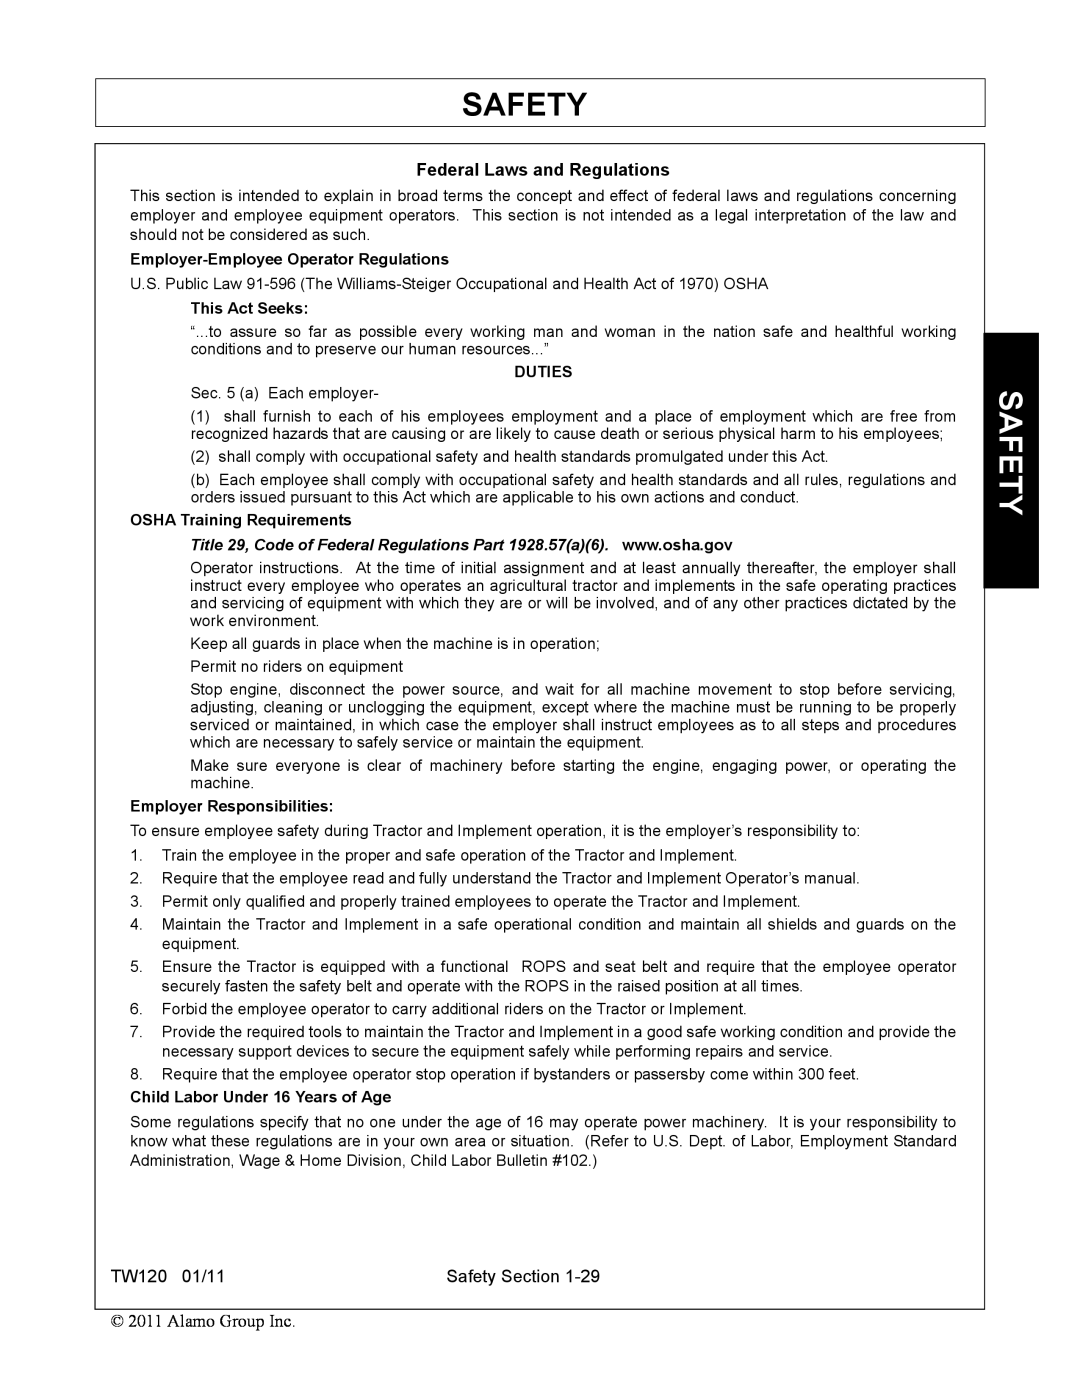 Blue Rhino FC-0025 Safety, Federal Laws and Regulations, Employer-EmployeeOperator Regulations, This Act Seeks, Duties 